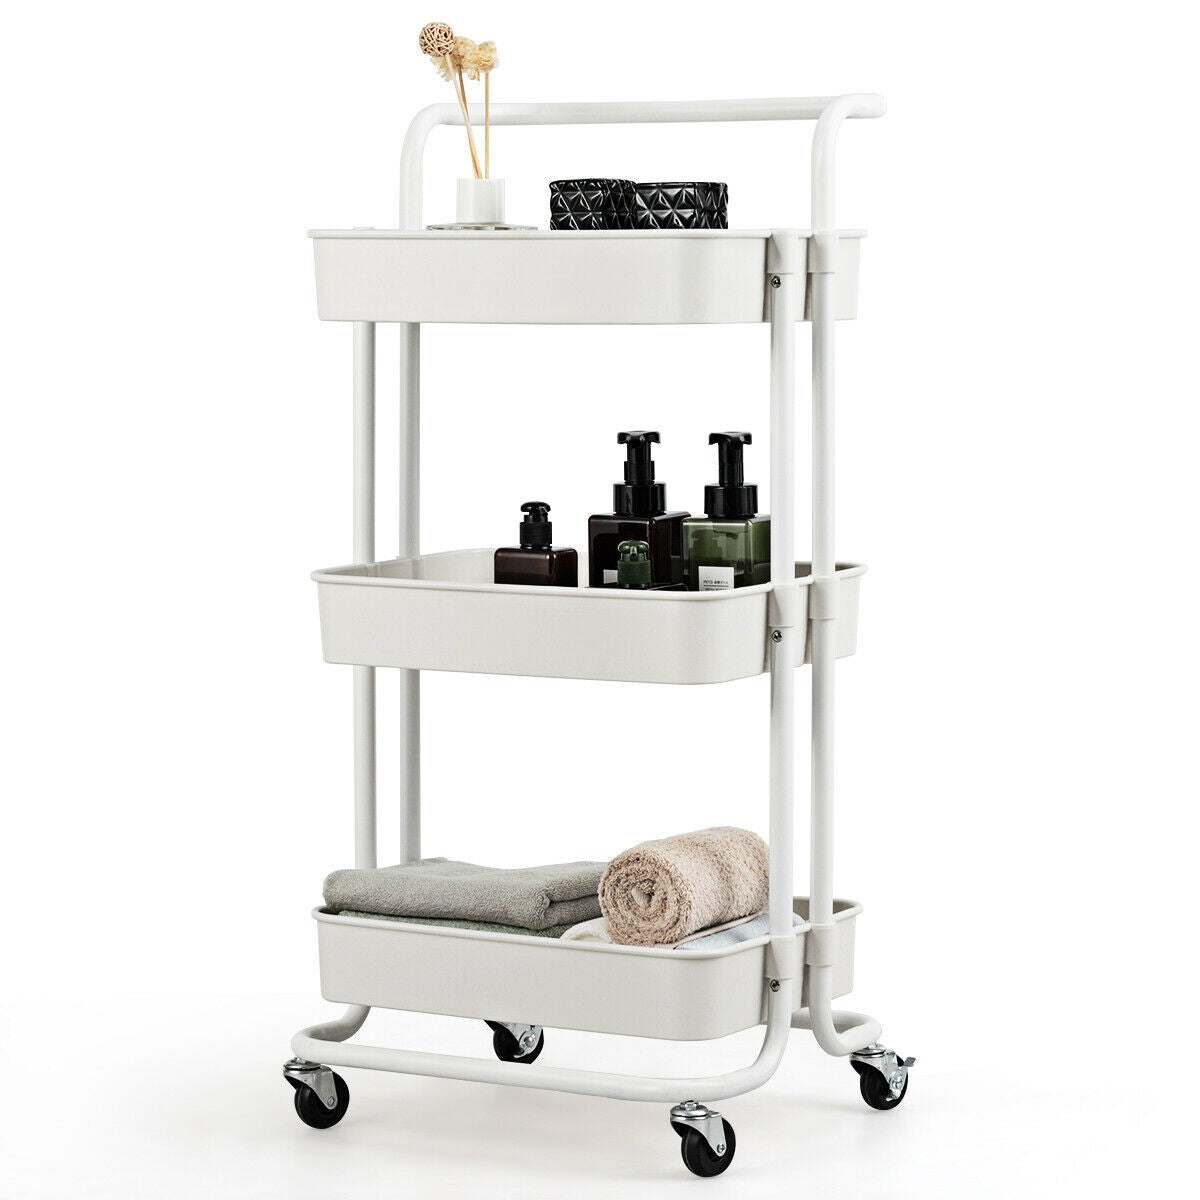 Giantex 3-Tier Utility Cart, ABS Mesh Baskets, Storage Trolley with Brakes for Home and Office 16.5"x14"x34"